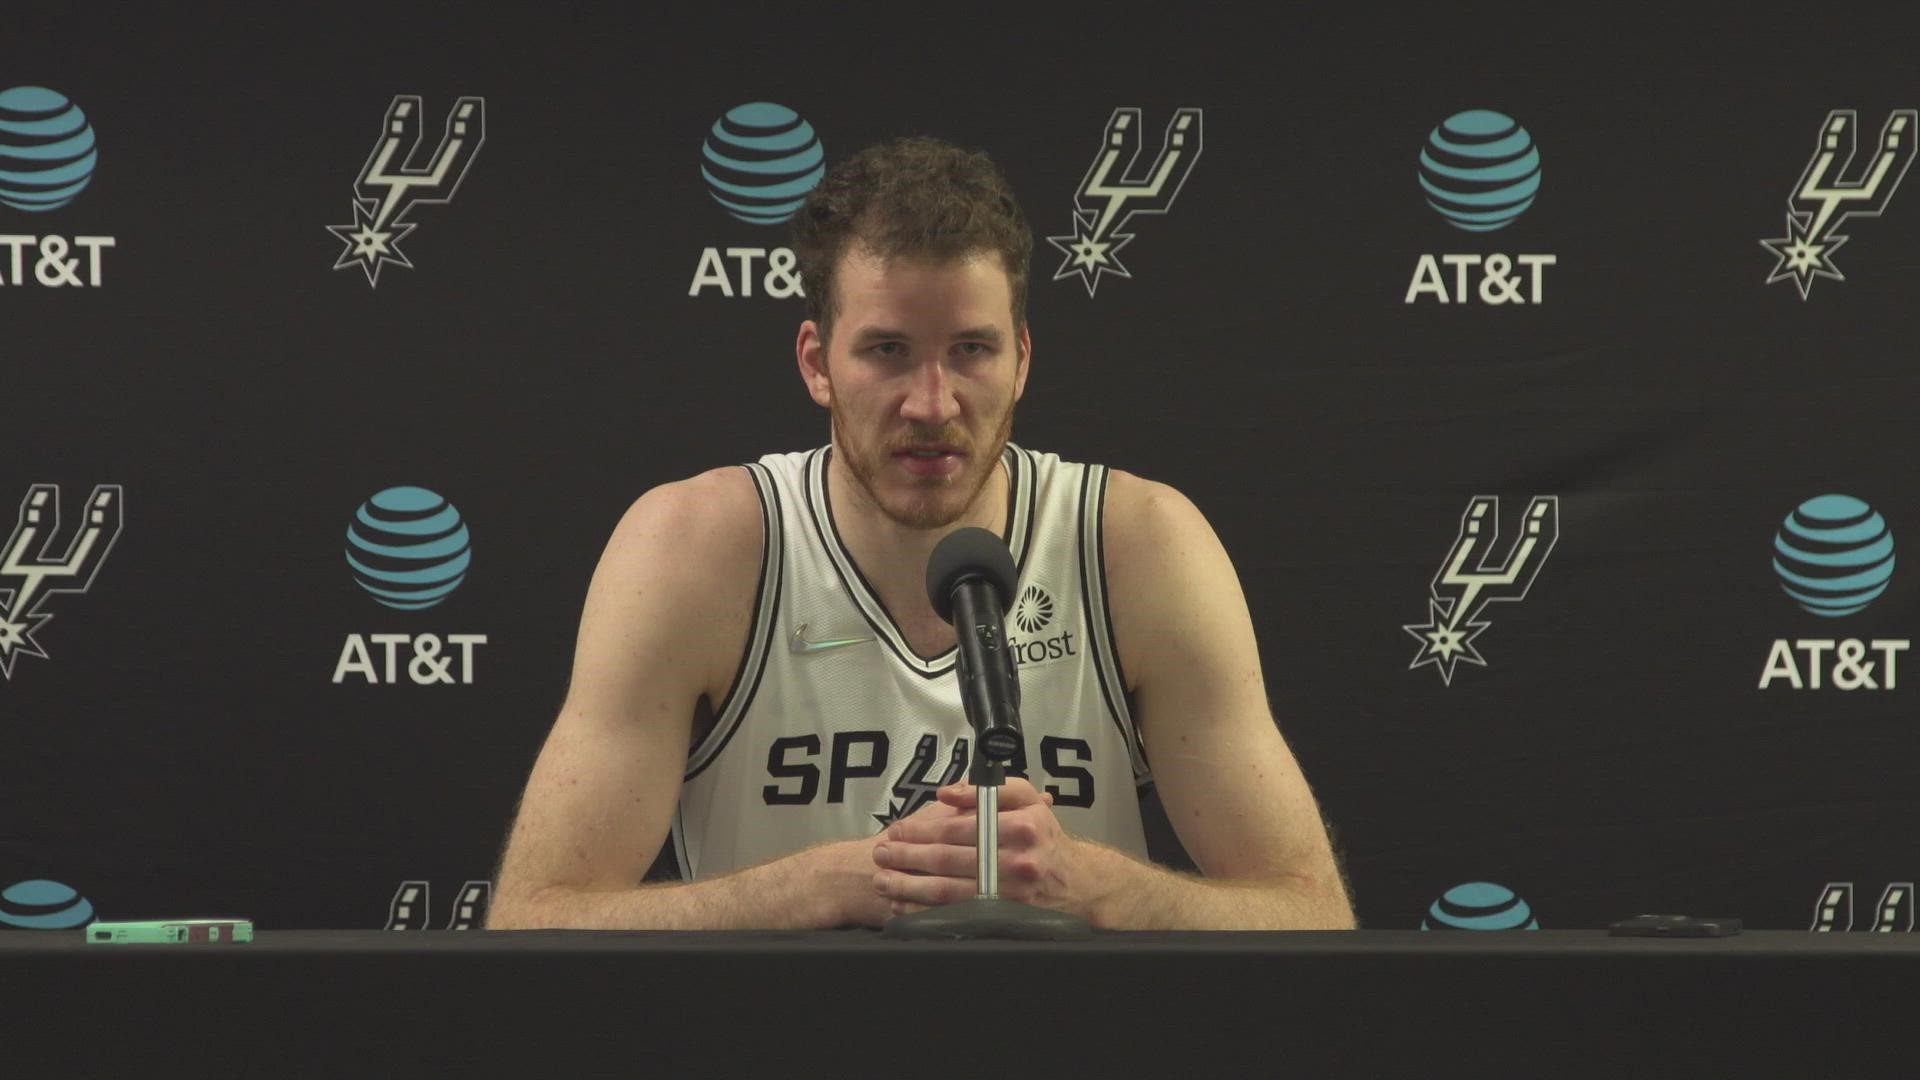 Poeltl spoke about why San Antonio struggled to finish the game in the fourth quarter.